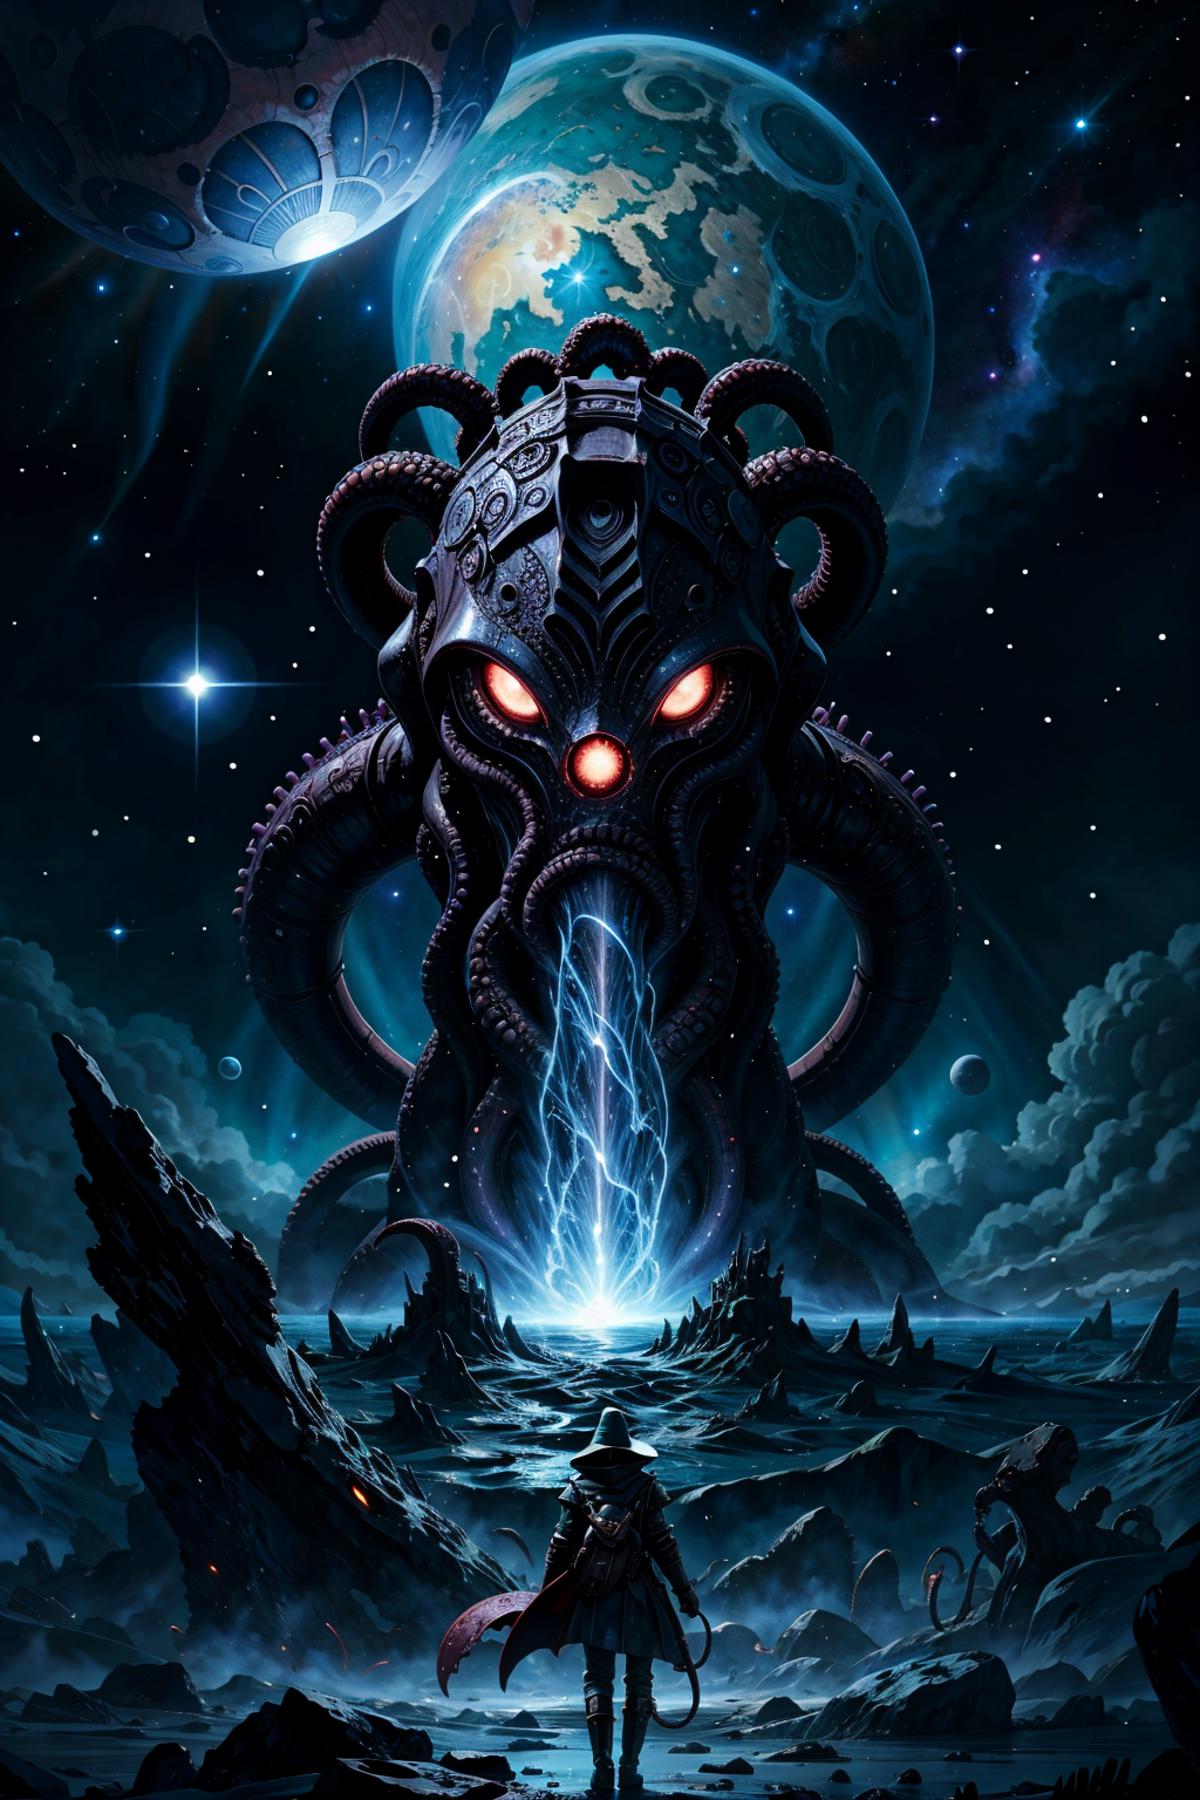 A dark and mysterious image featuring an alien monster with a large head and glowing red eyes, surrounded by a dark sky with several stars. The monster is situated among a rocky landscape and appears to be coming from the sky to the ocean, creating an eerie and captivating scene.